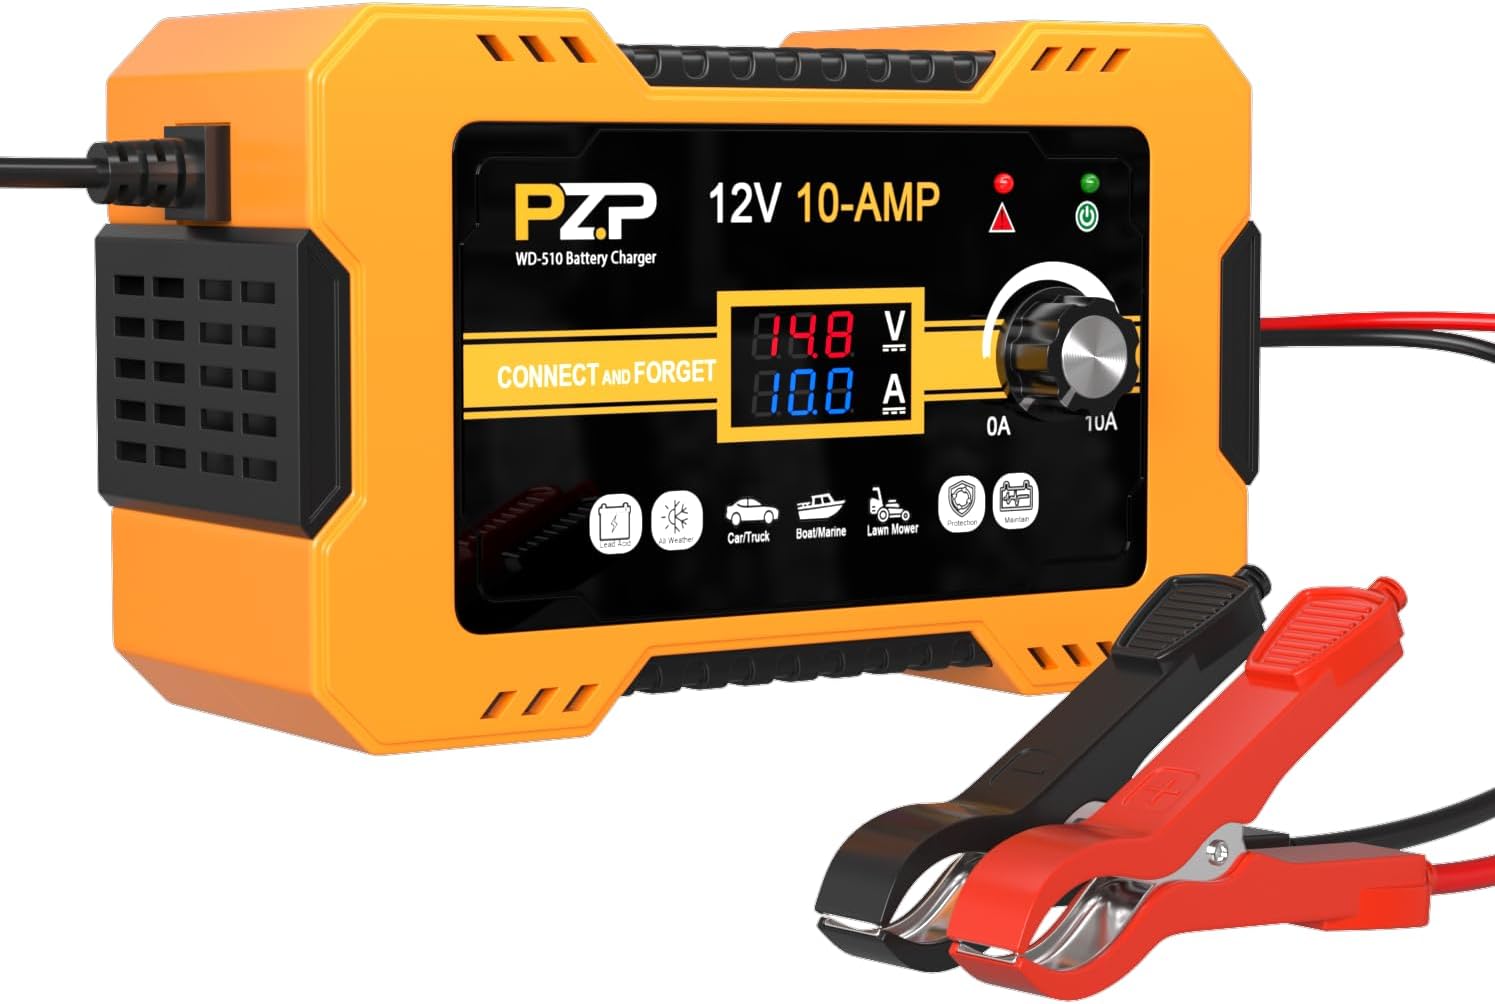 PZP Car Battery Charger Review